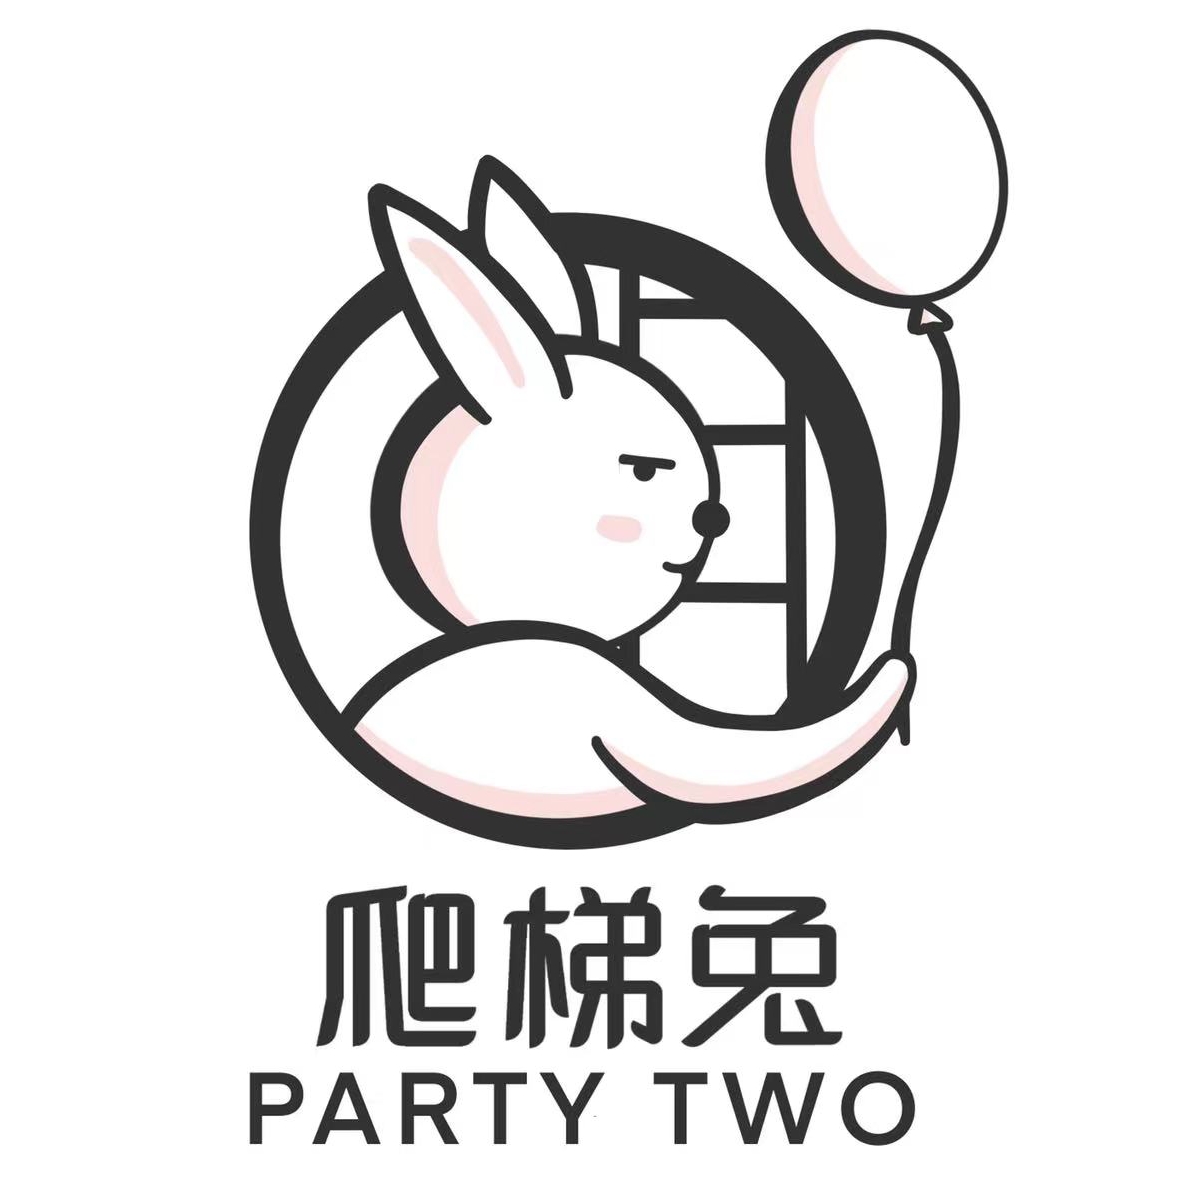 PARTY TWO母婴用品生产厂家